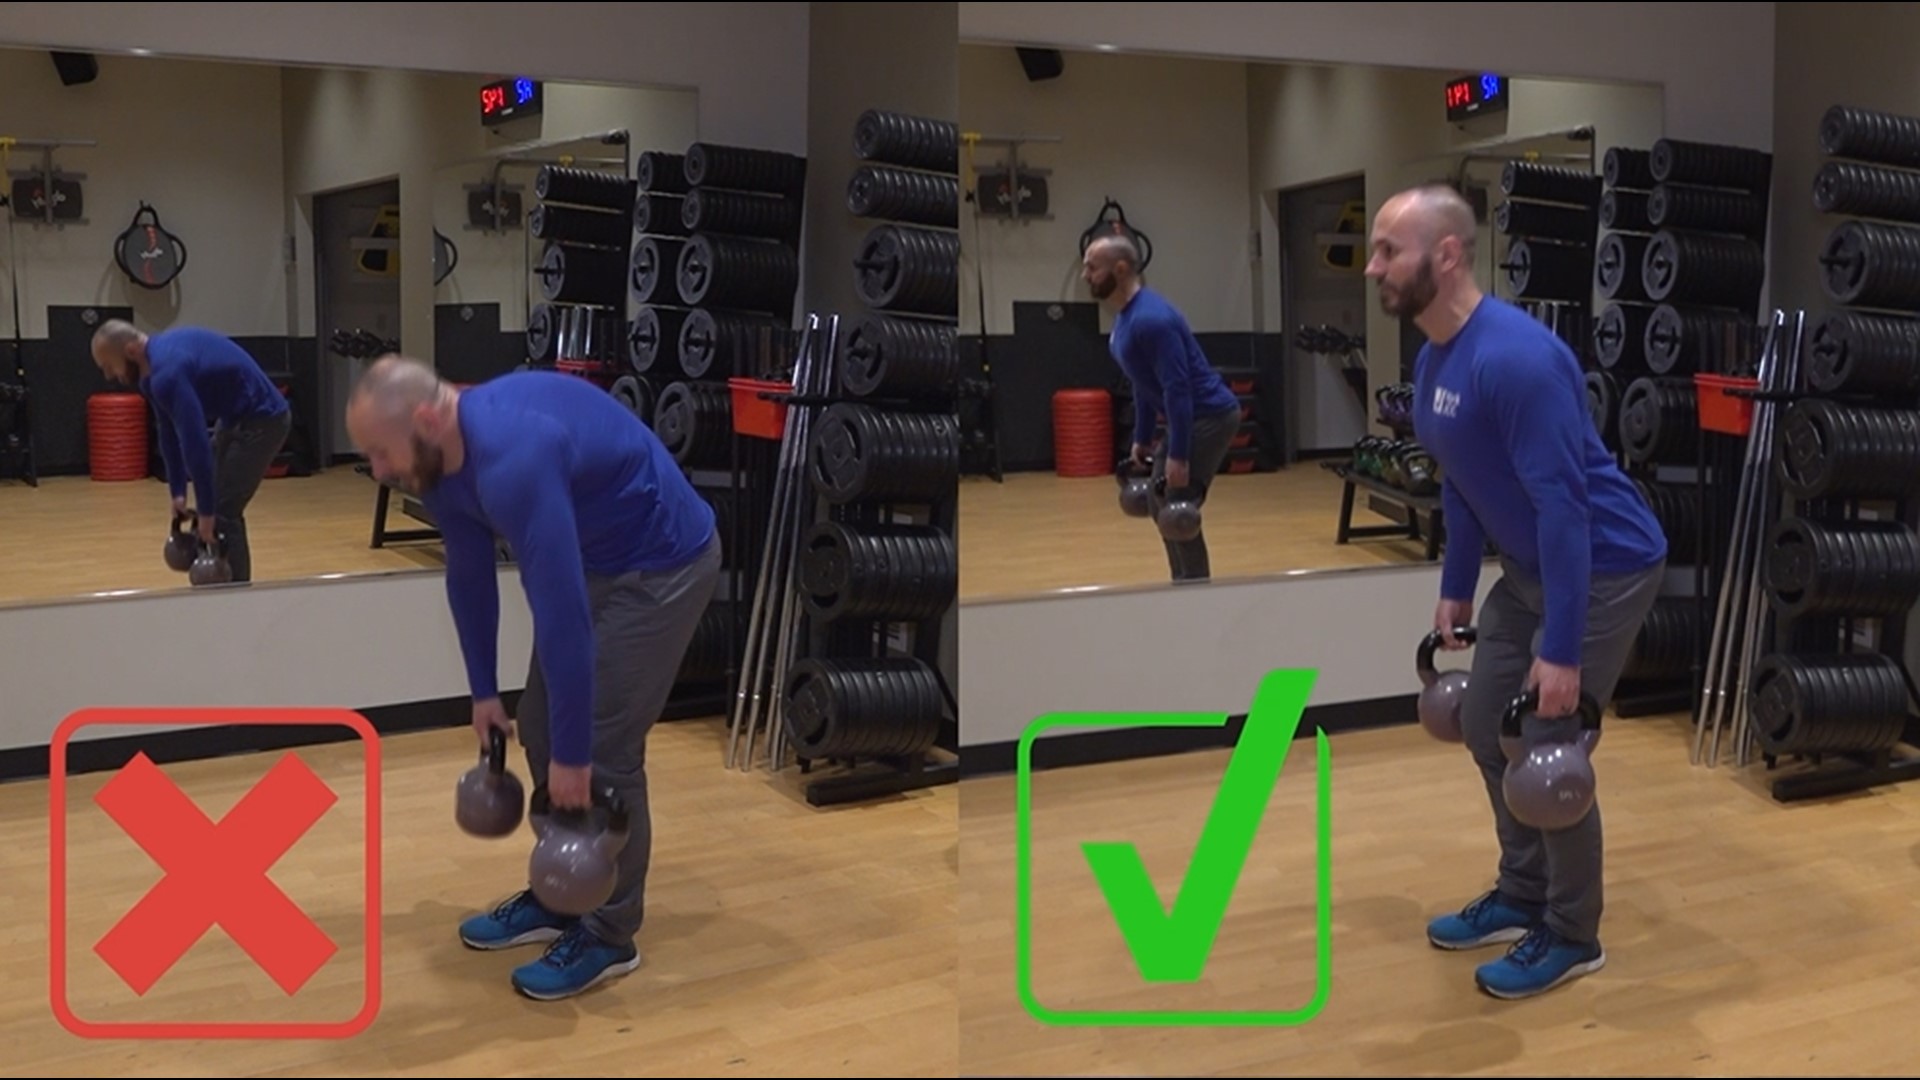 Bracing has come up in a few of our FitMinute's, so it's time to get more in-depth with how to accomplish good core engagement in workouts or daily life!